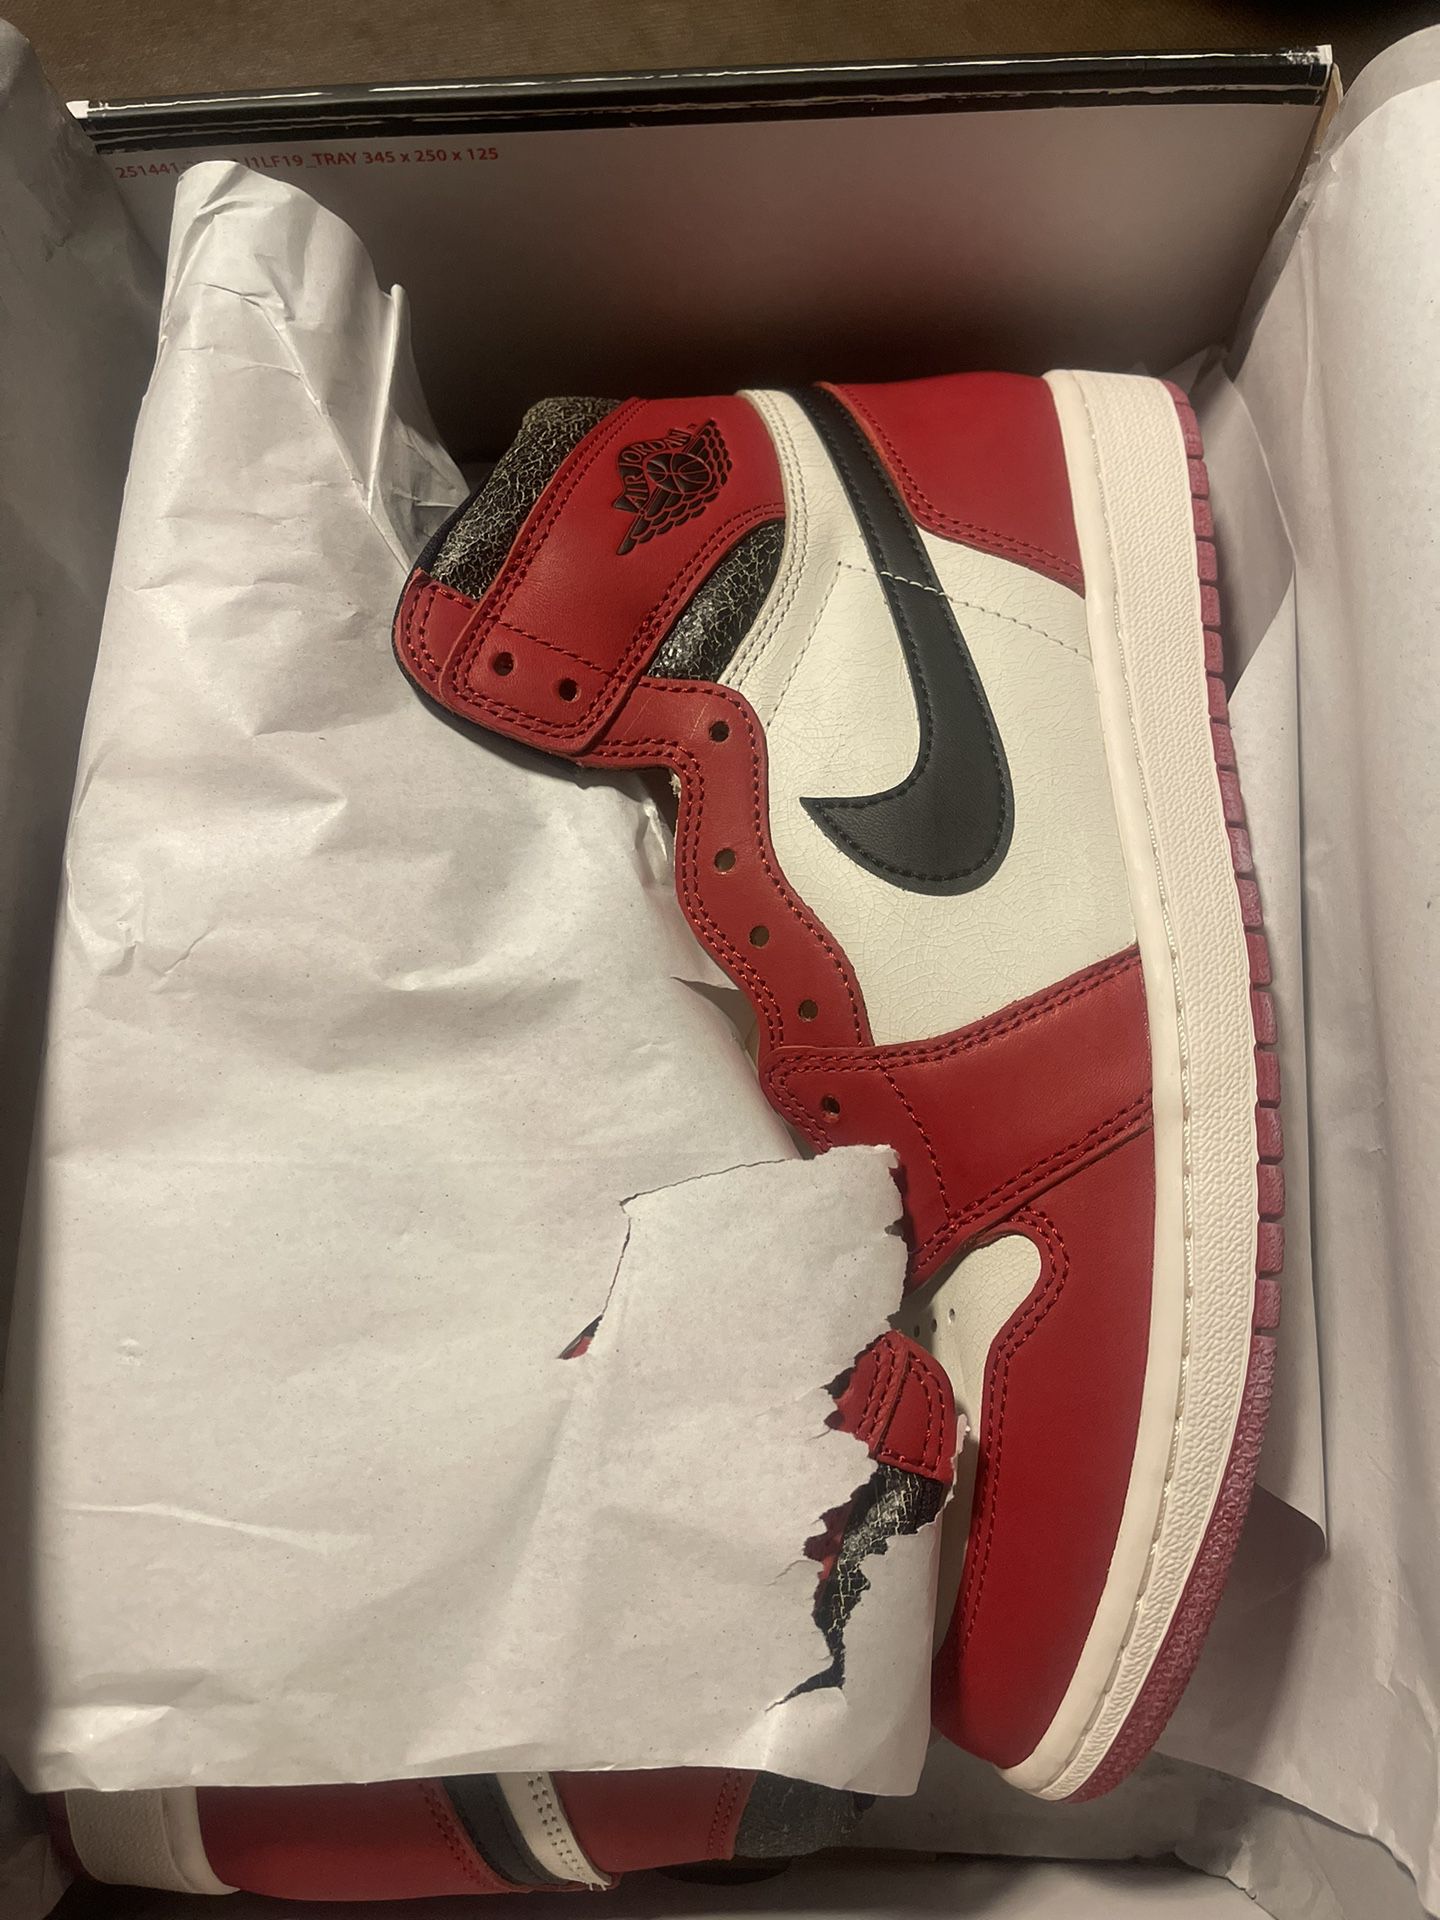 Lost and Found Air Jordan 1 Chicago Size 11 